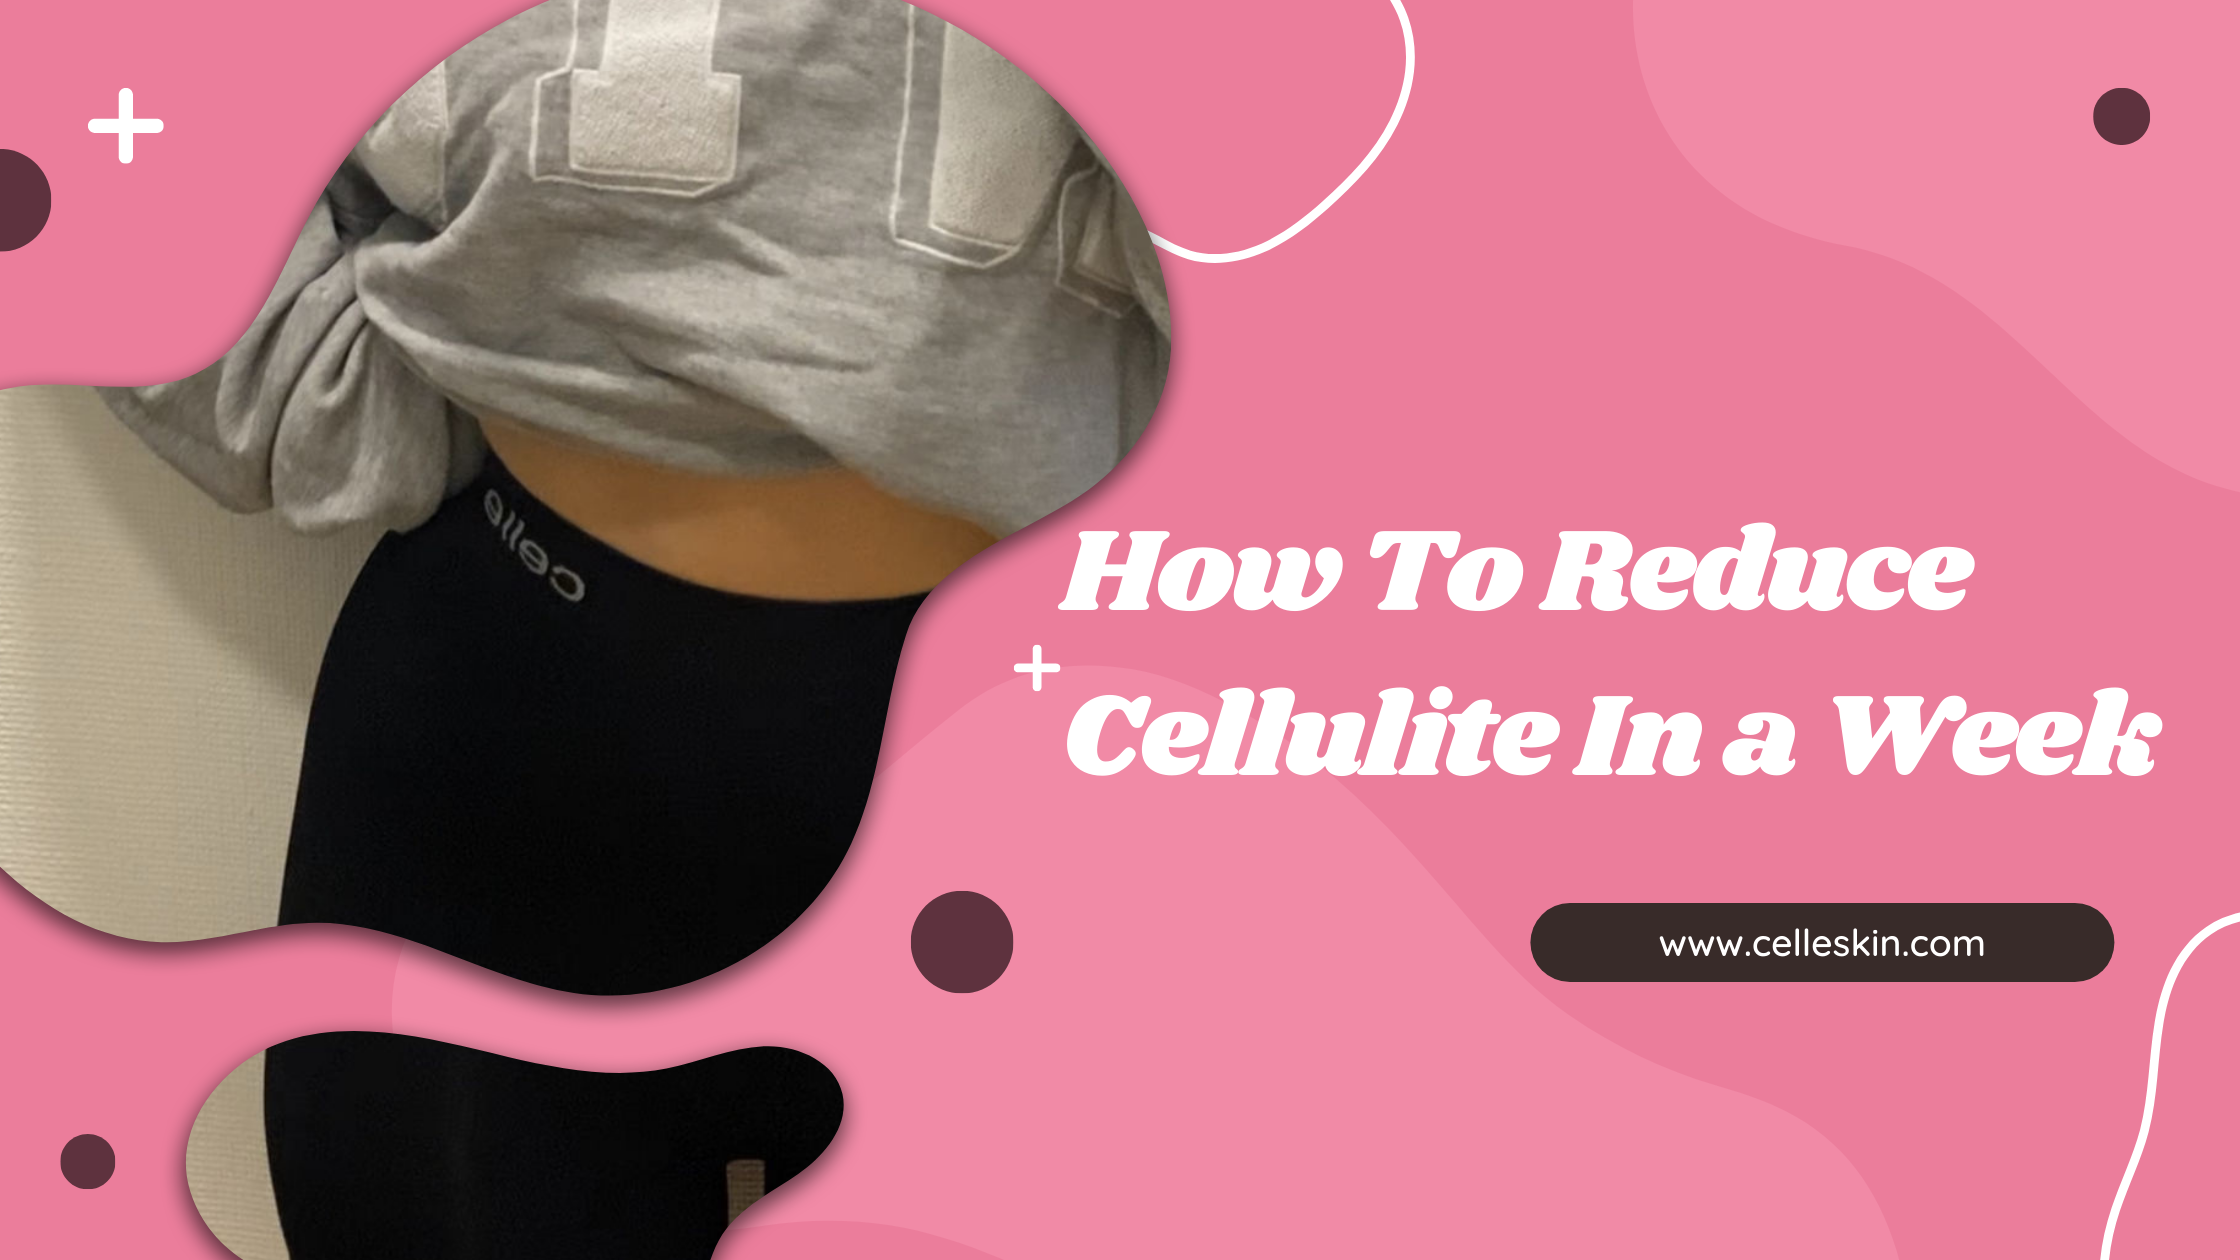 Reduce Cellulite in a Week: Expert Tips and Tricks